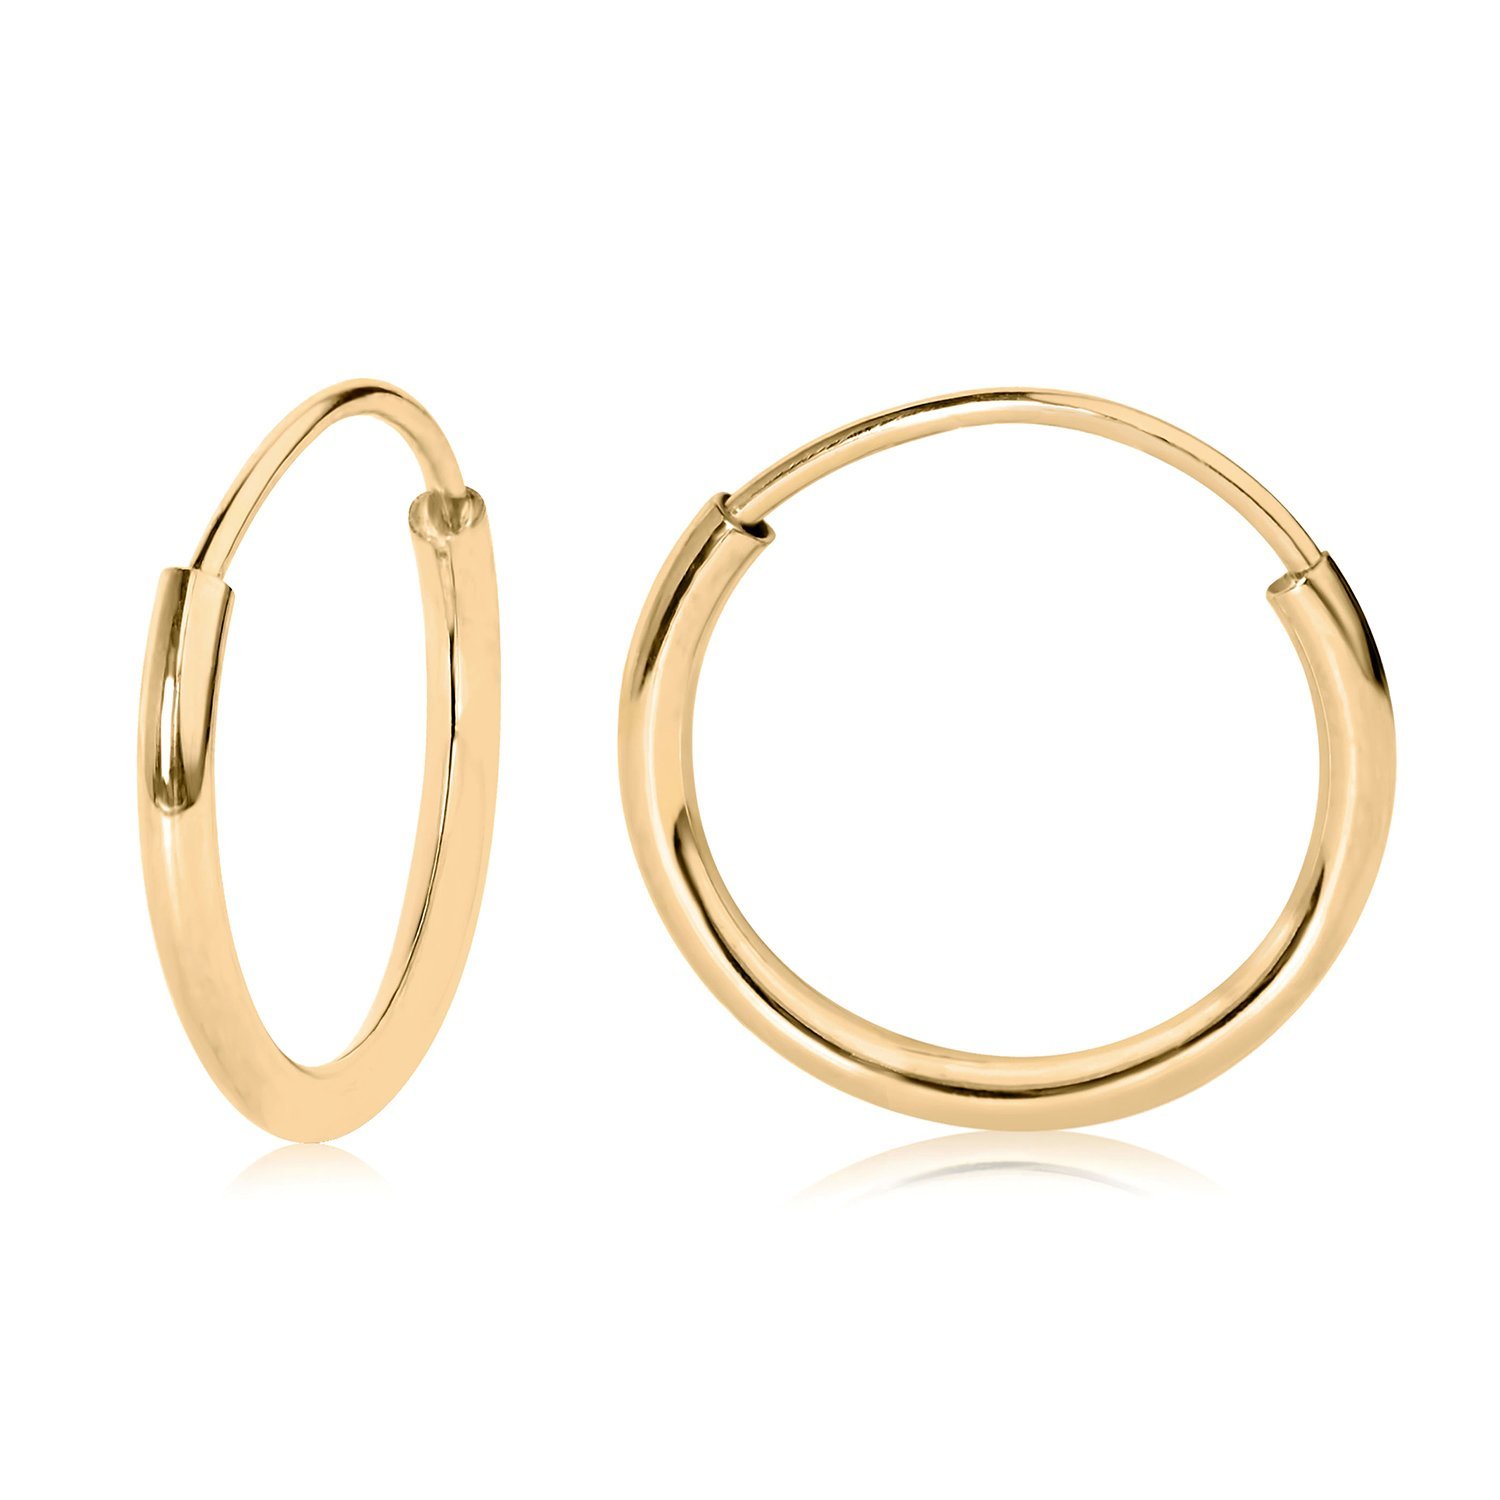 14k White or Yellow Gold Endless Hoop Earrings (10-20mm), 1.0mm Width, for a Woman, Man or Teens by Olivia's Collection